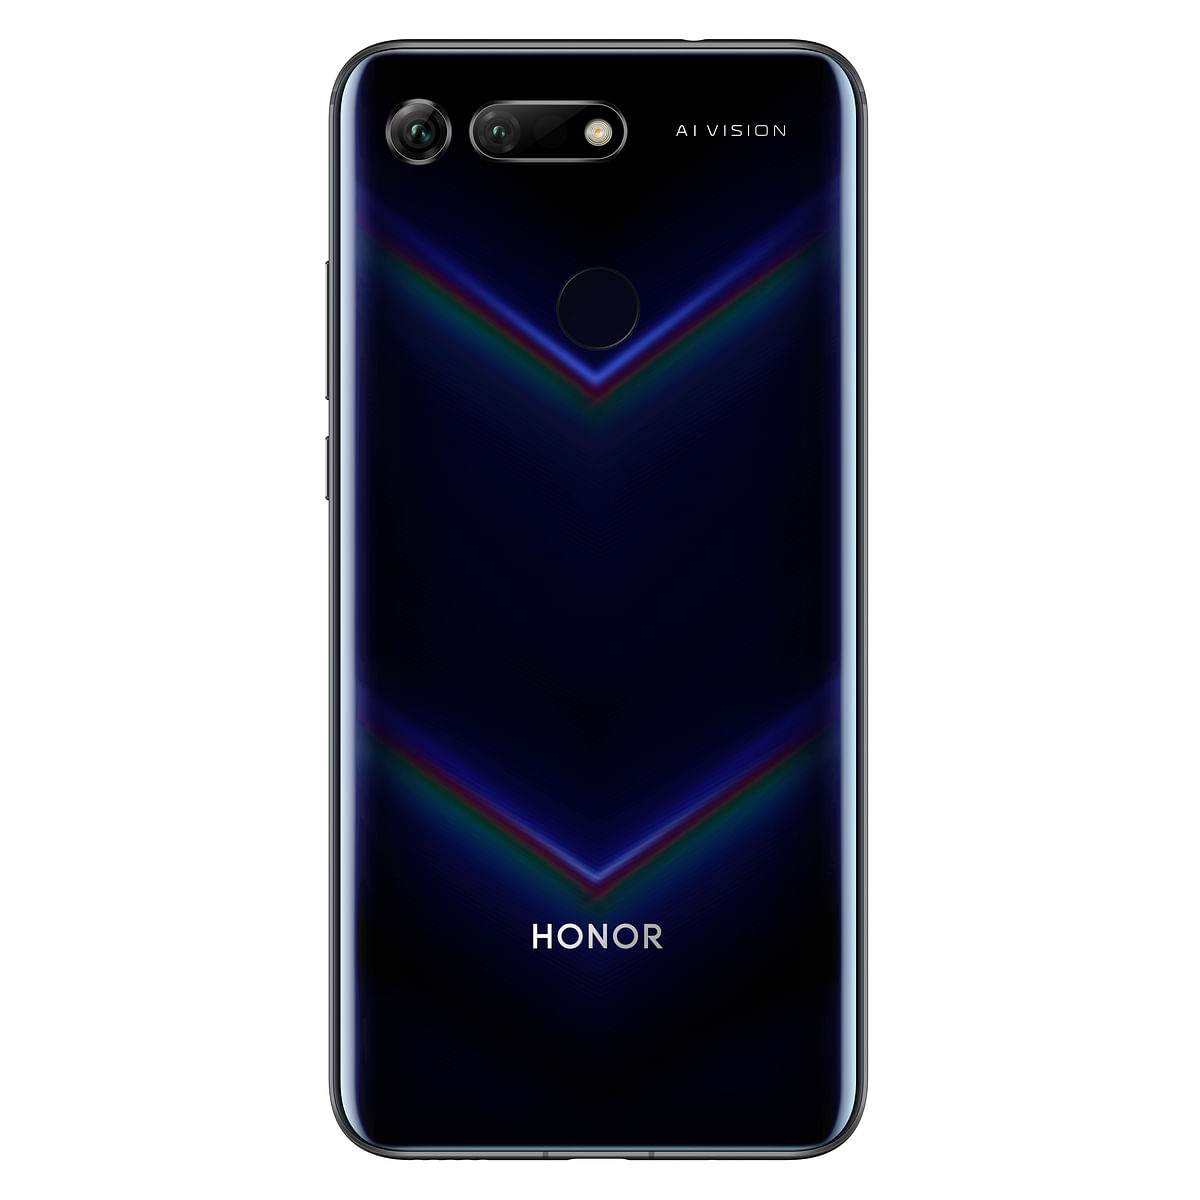 The Honor View 20 is a winner all the way